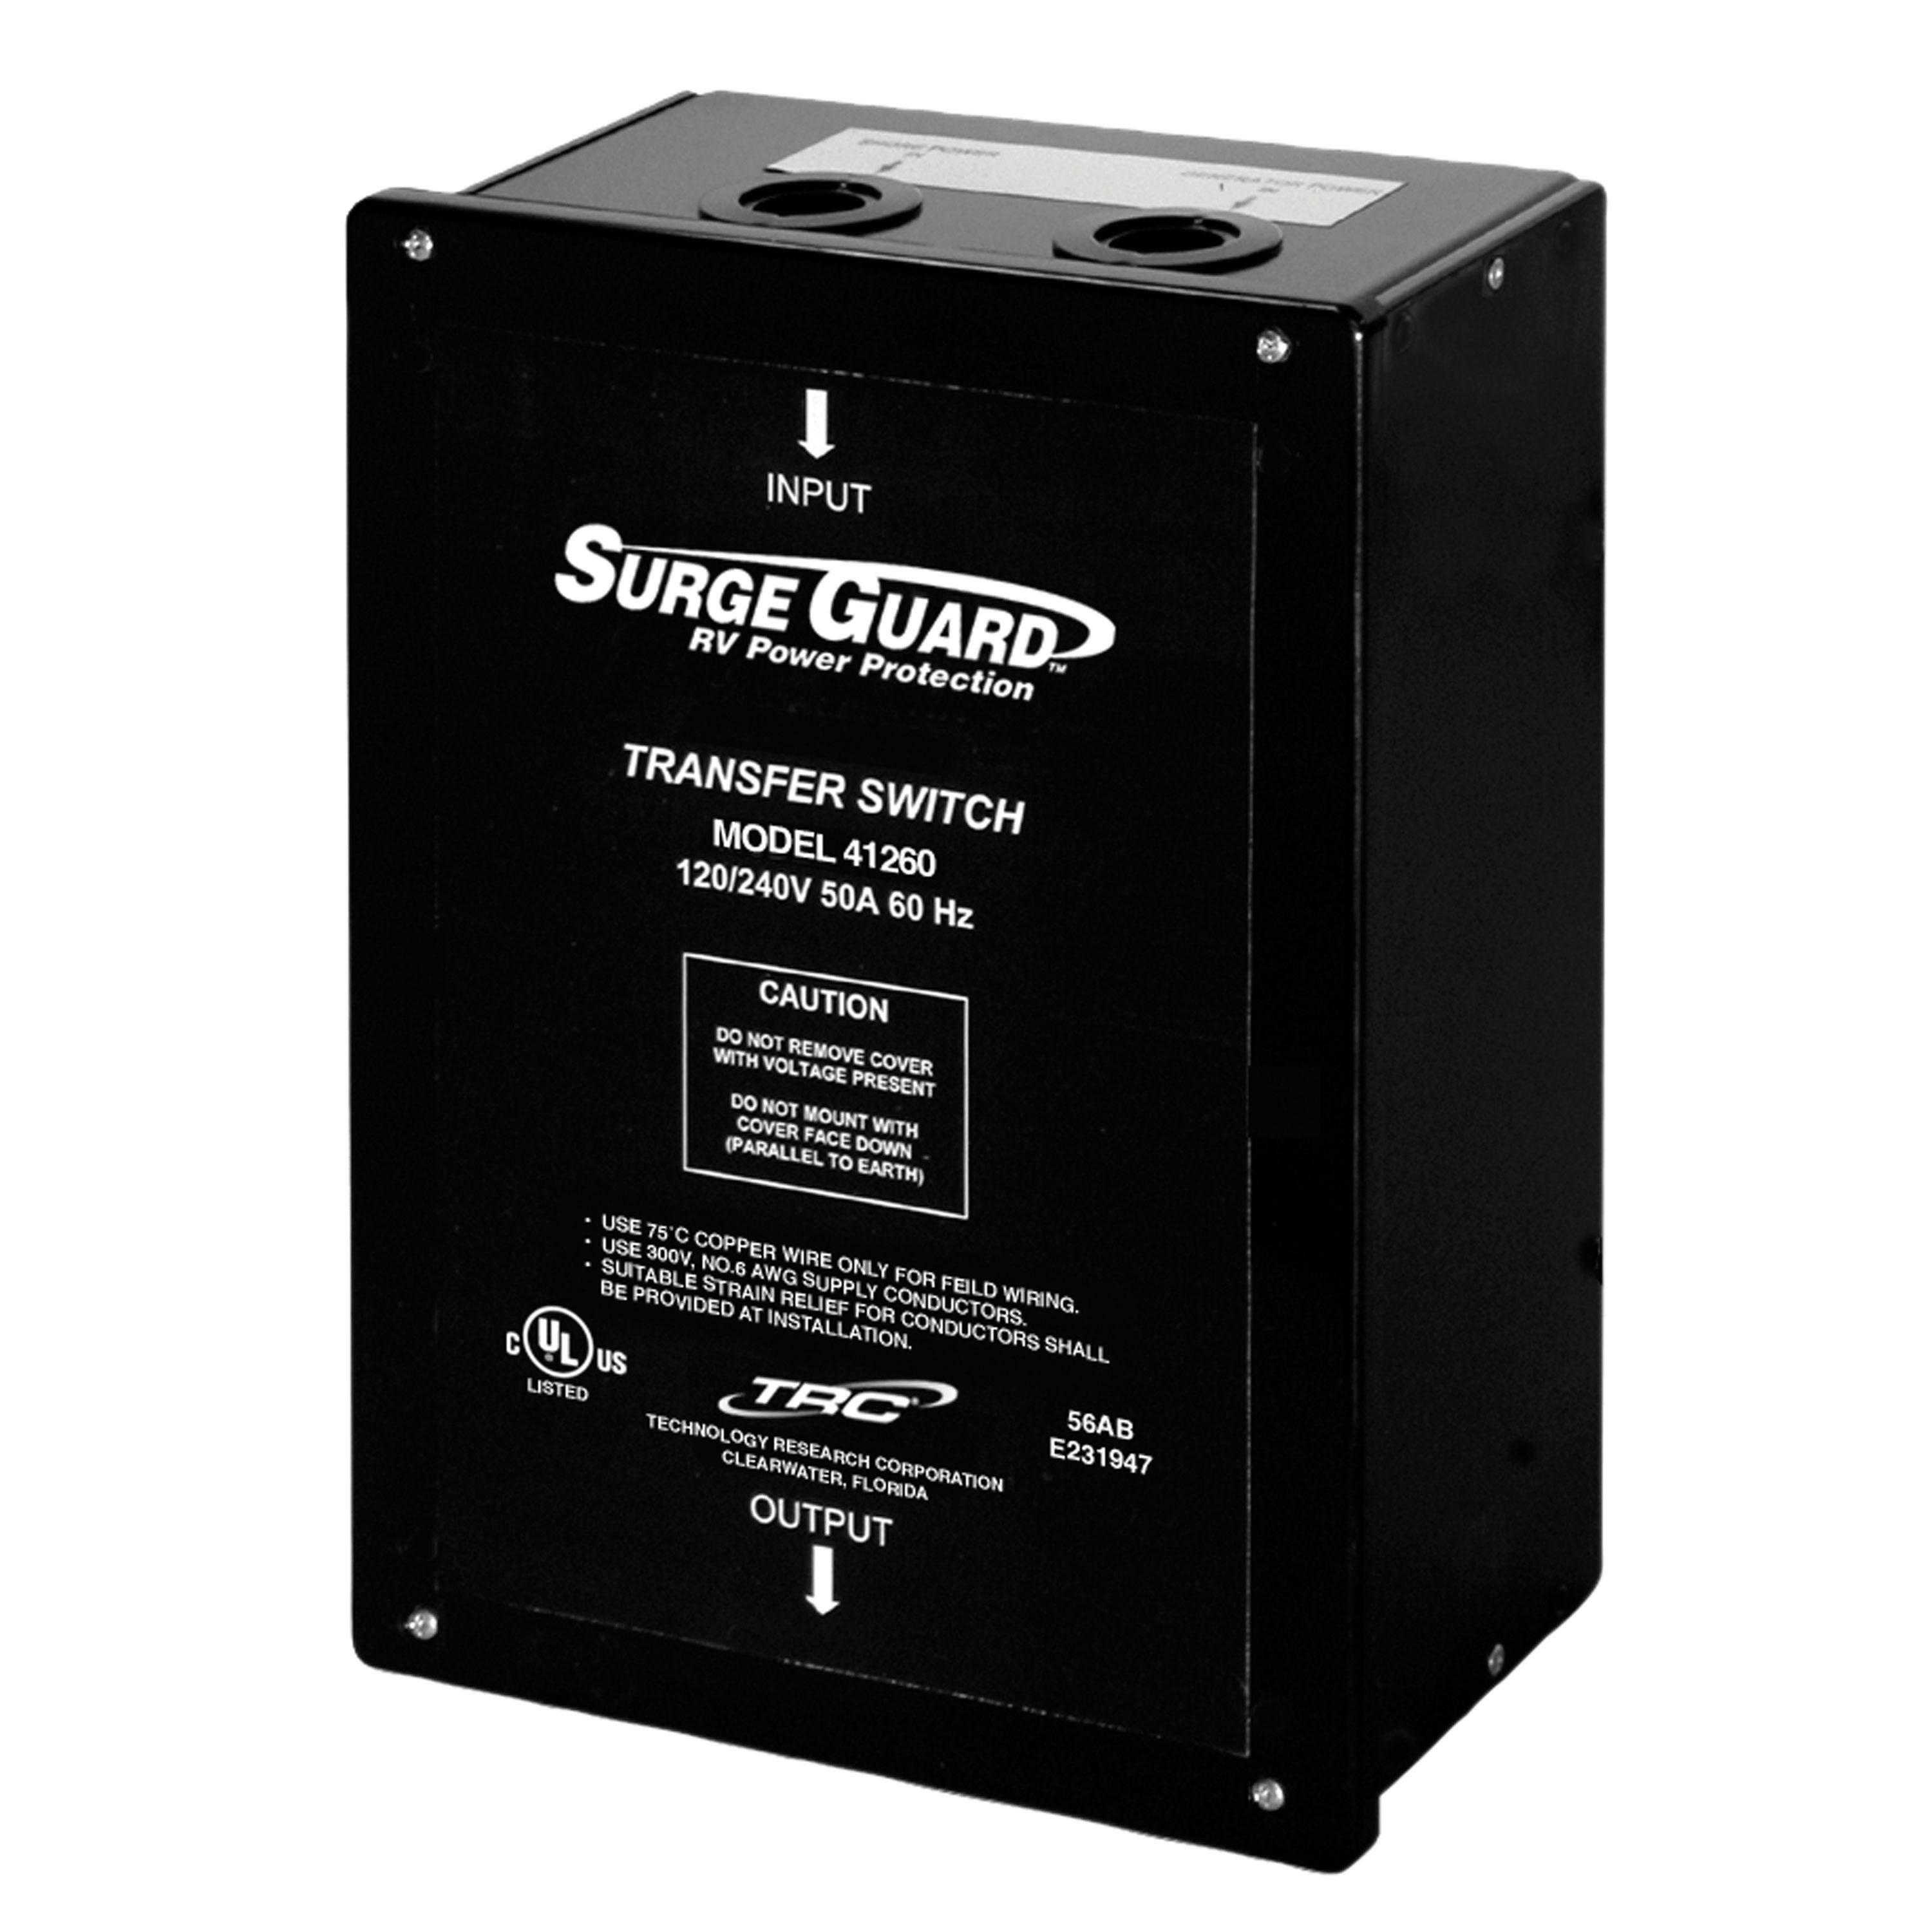 Southwire 41260 Surge Guard Automatic Hardwire Transfer Switch - 50 Amp, 120/240V, 60 Hz